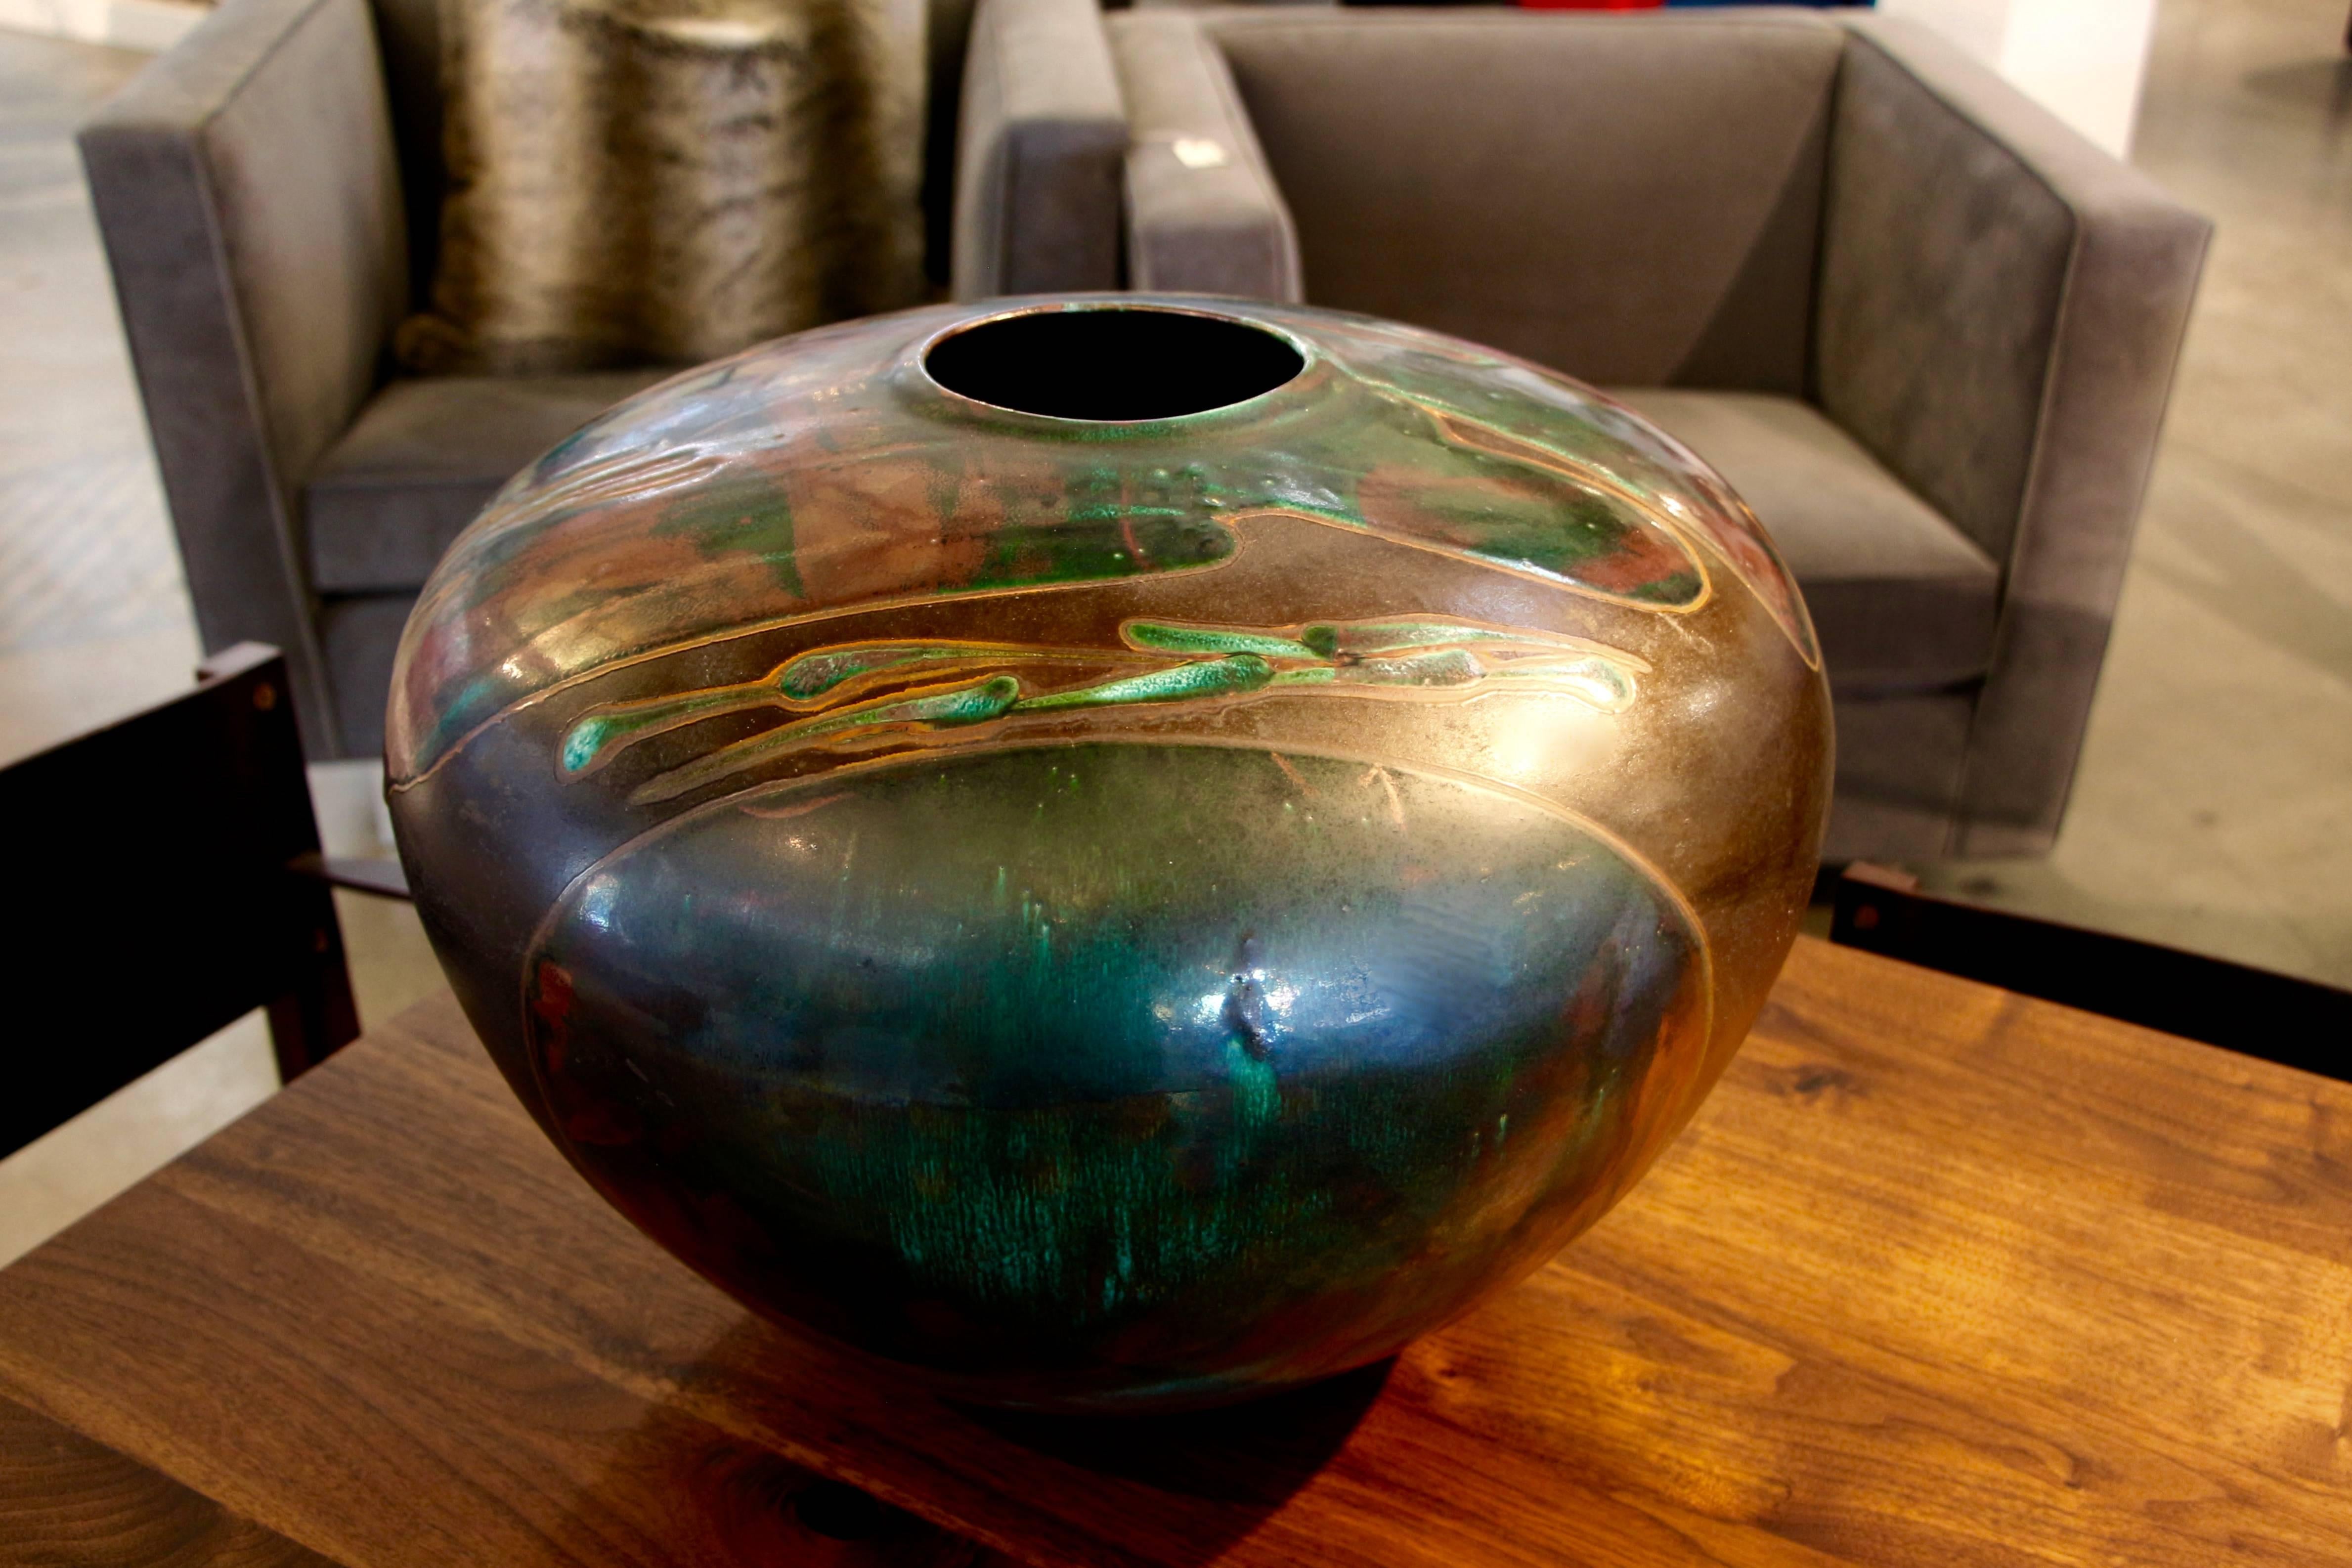 A signed Tony Evans of Evans Studios in California monumental raku fired centerpiece. Very typical colors, as his 1980s pieces were all in pink hues. This is one impressive piece of pottery.